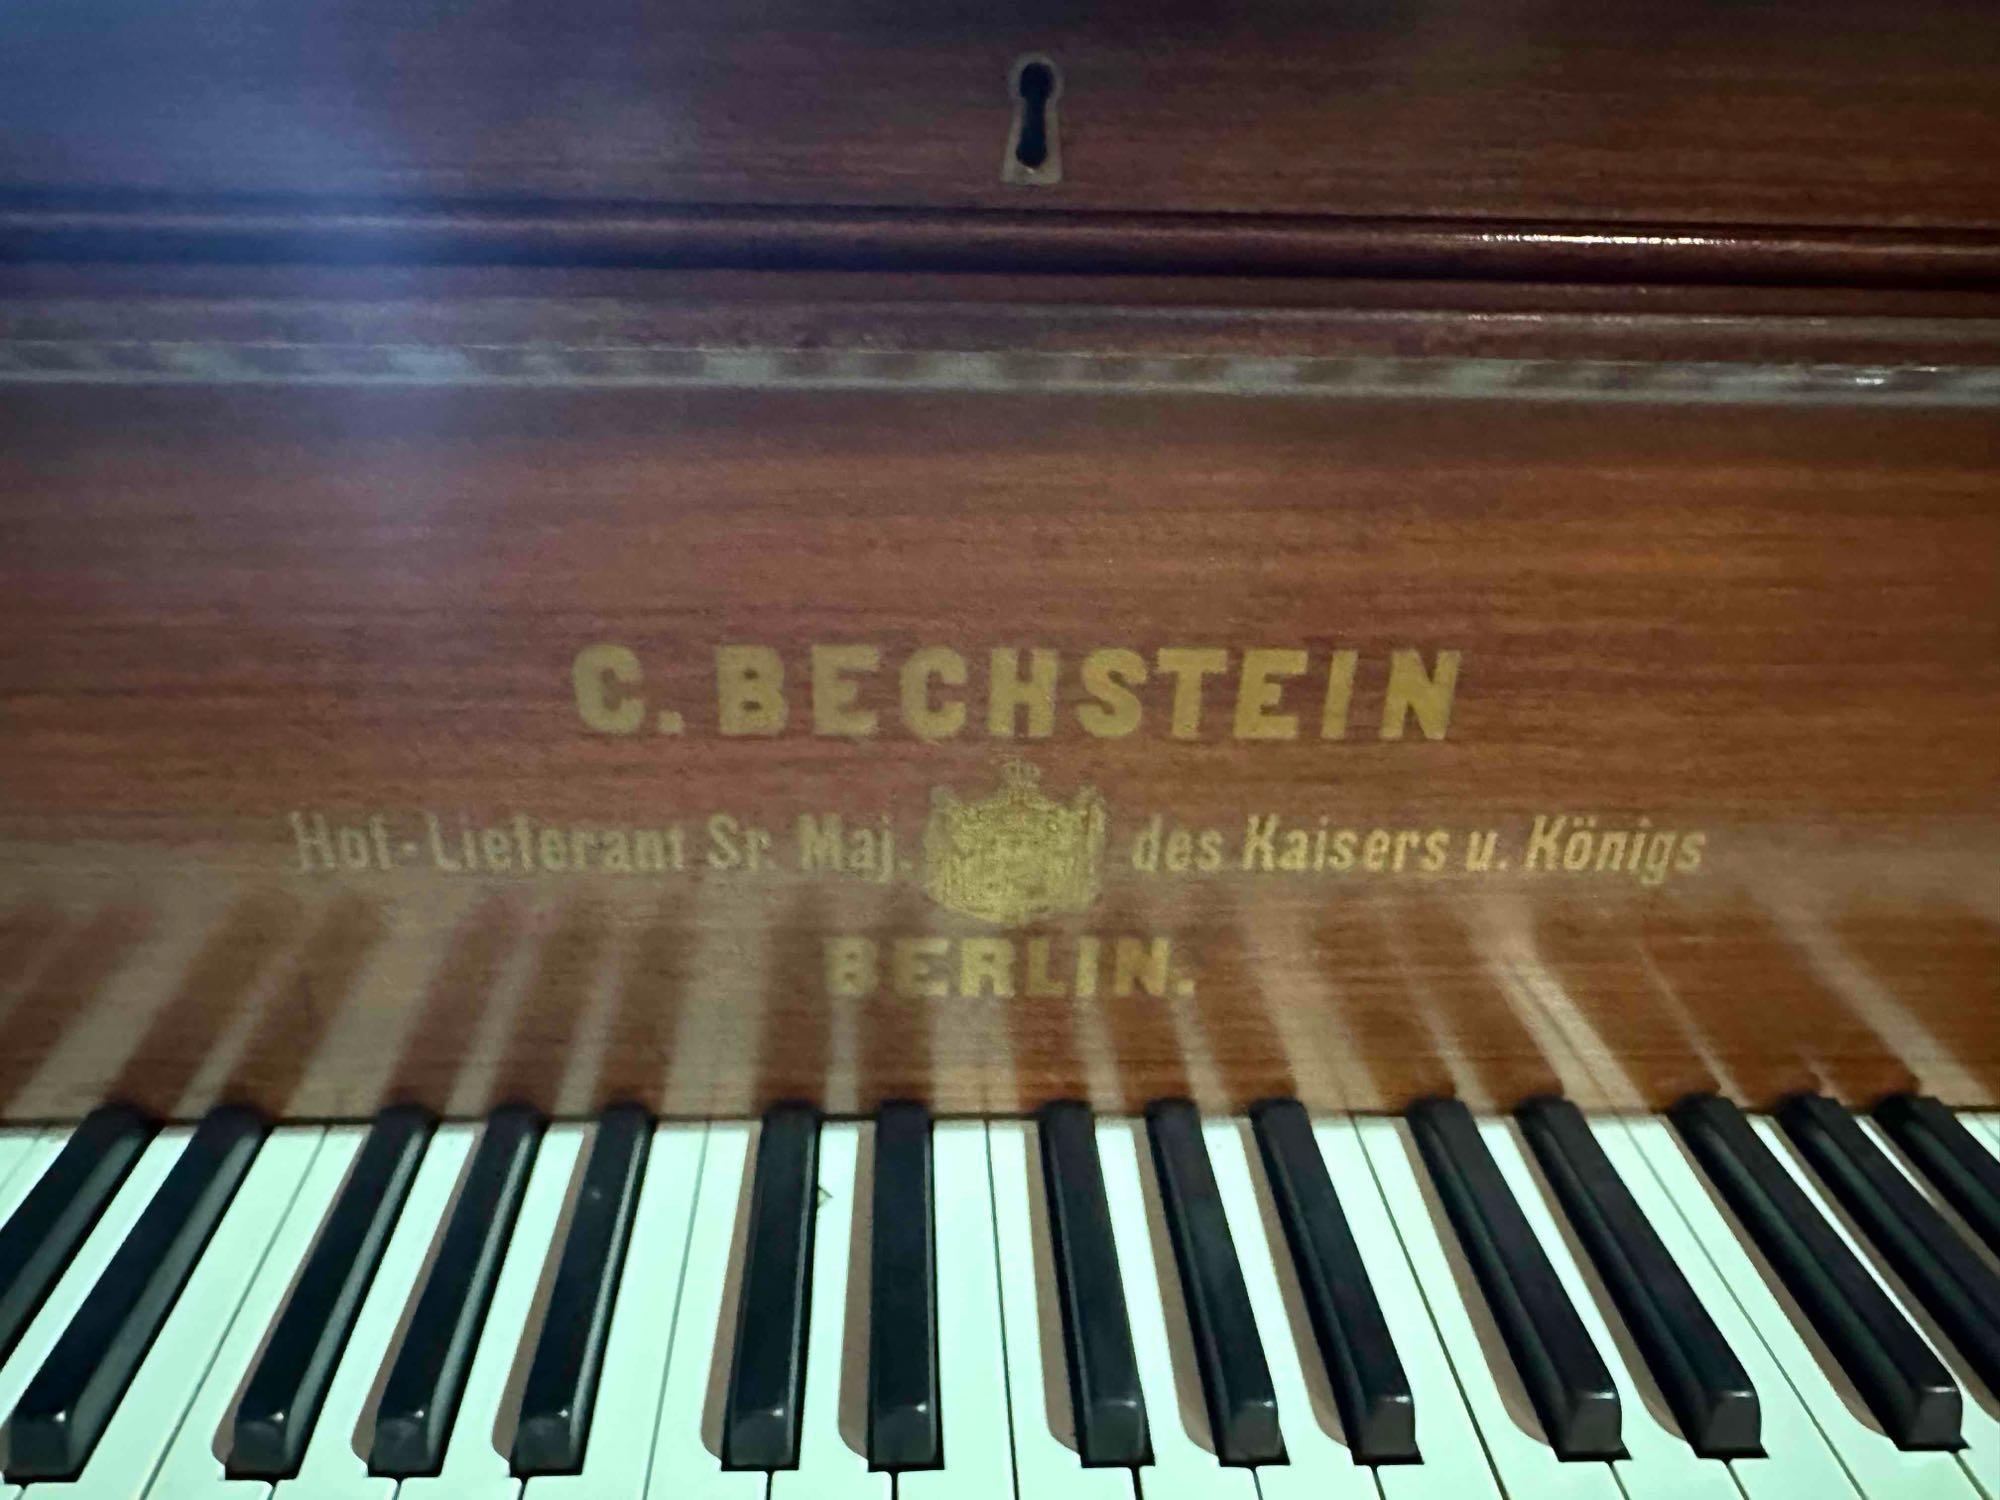 C Bechstein Berlin Model V Rosewood Case 6ft 7 Grand Piano Manufactured In 1894 (Serial 37578) The - Image 2 of 8